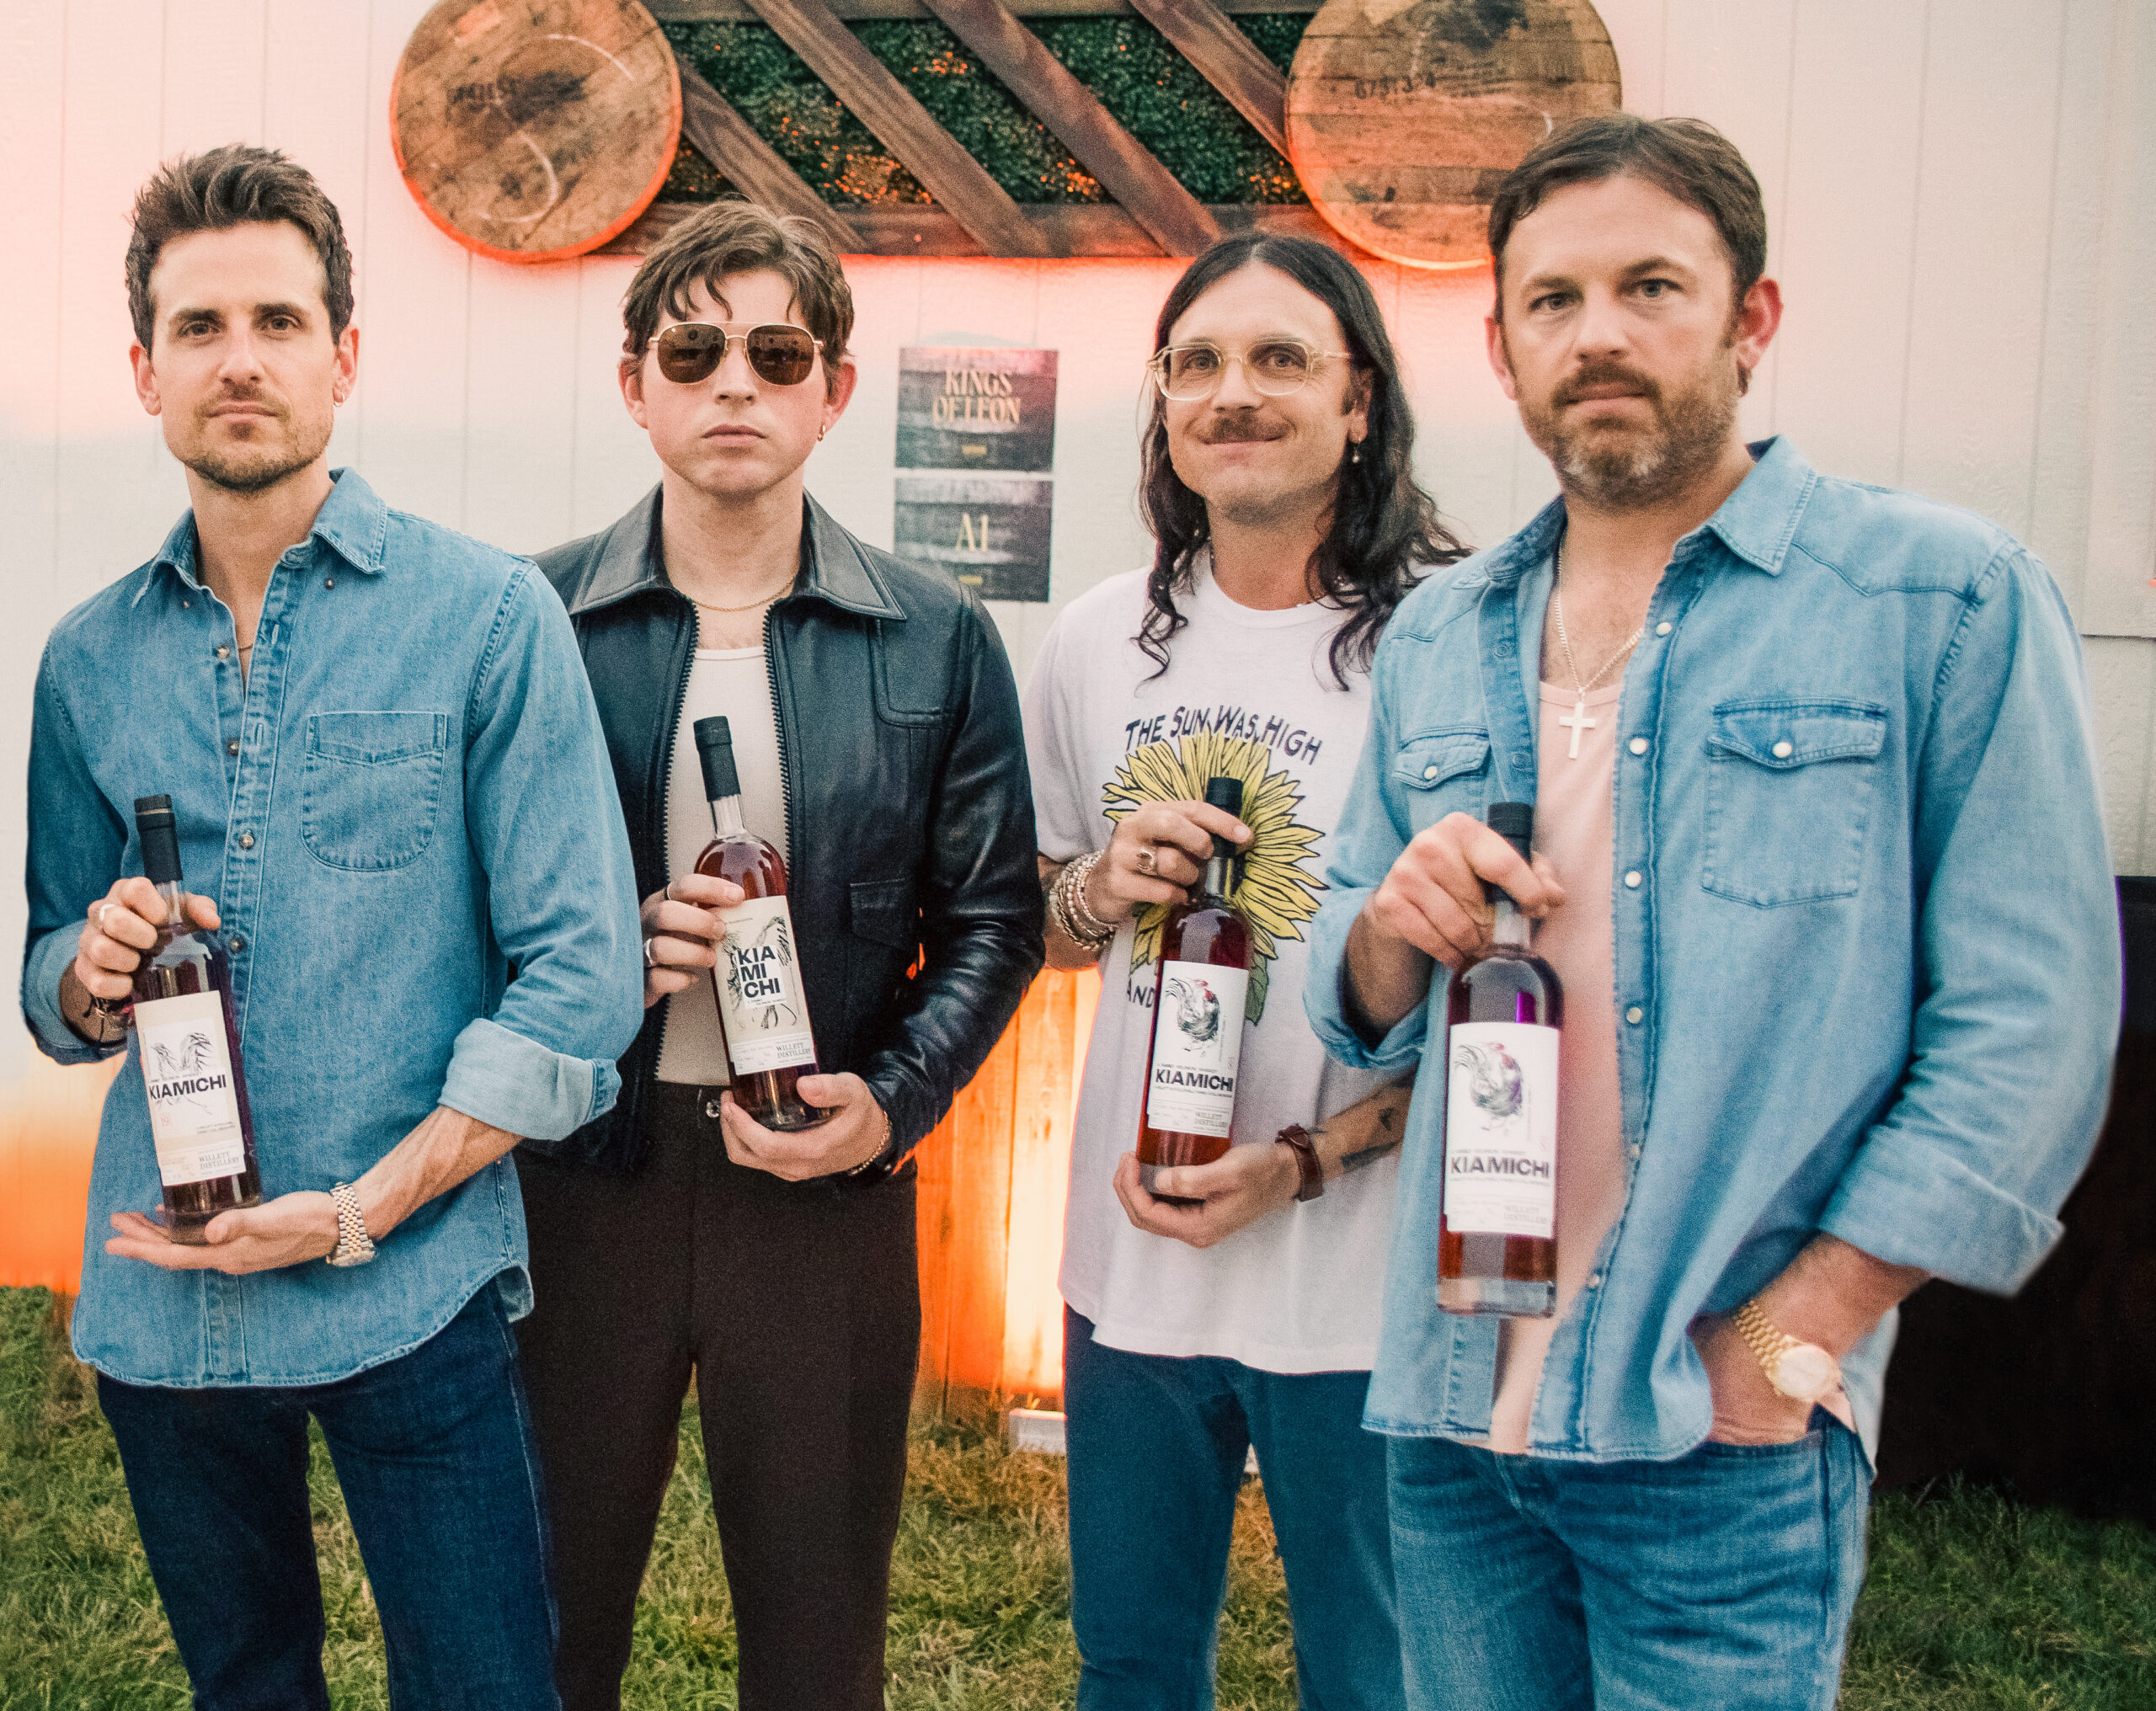 How A Kings Of Leon Show In Wales Is Turning Into An Unlikely Football Celebration